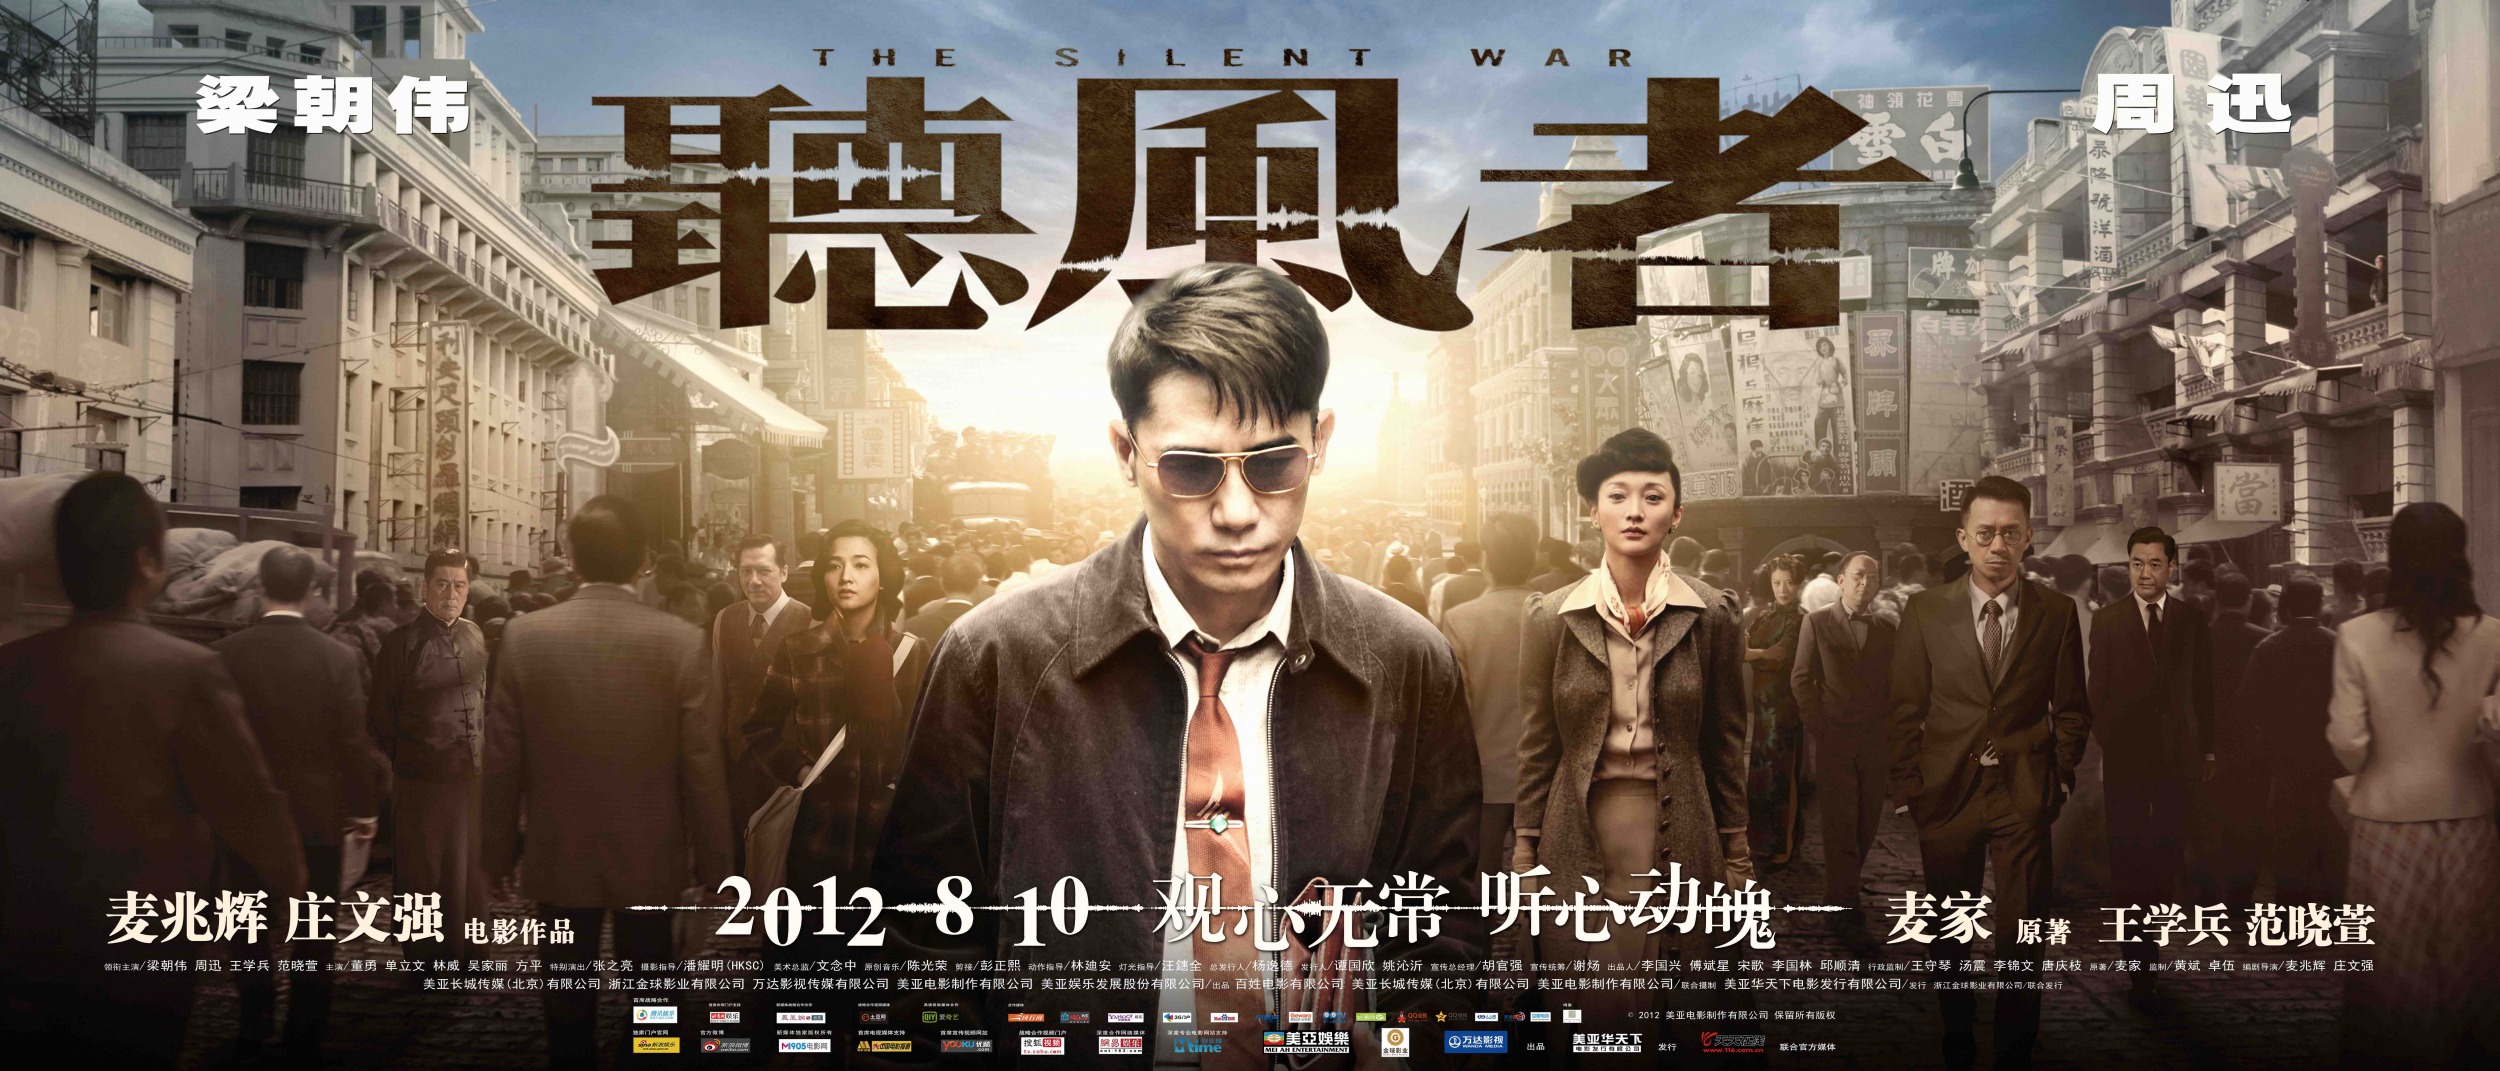 Mega Sized Movie Poster Image for Ting feng zhe (#7 of 9)